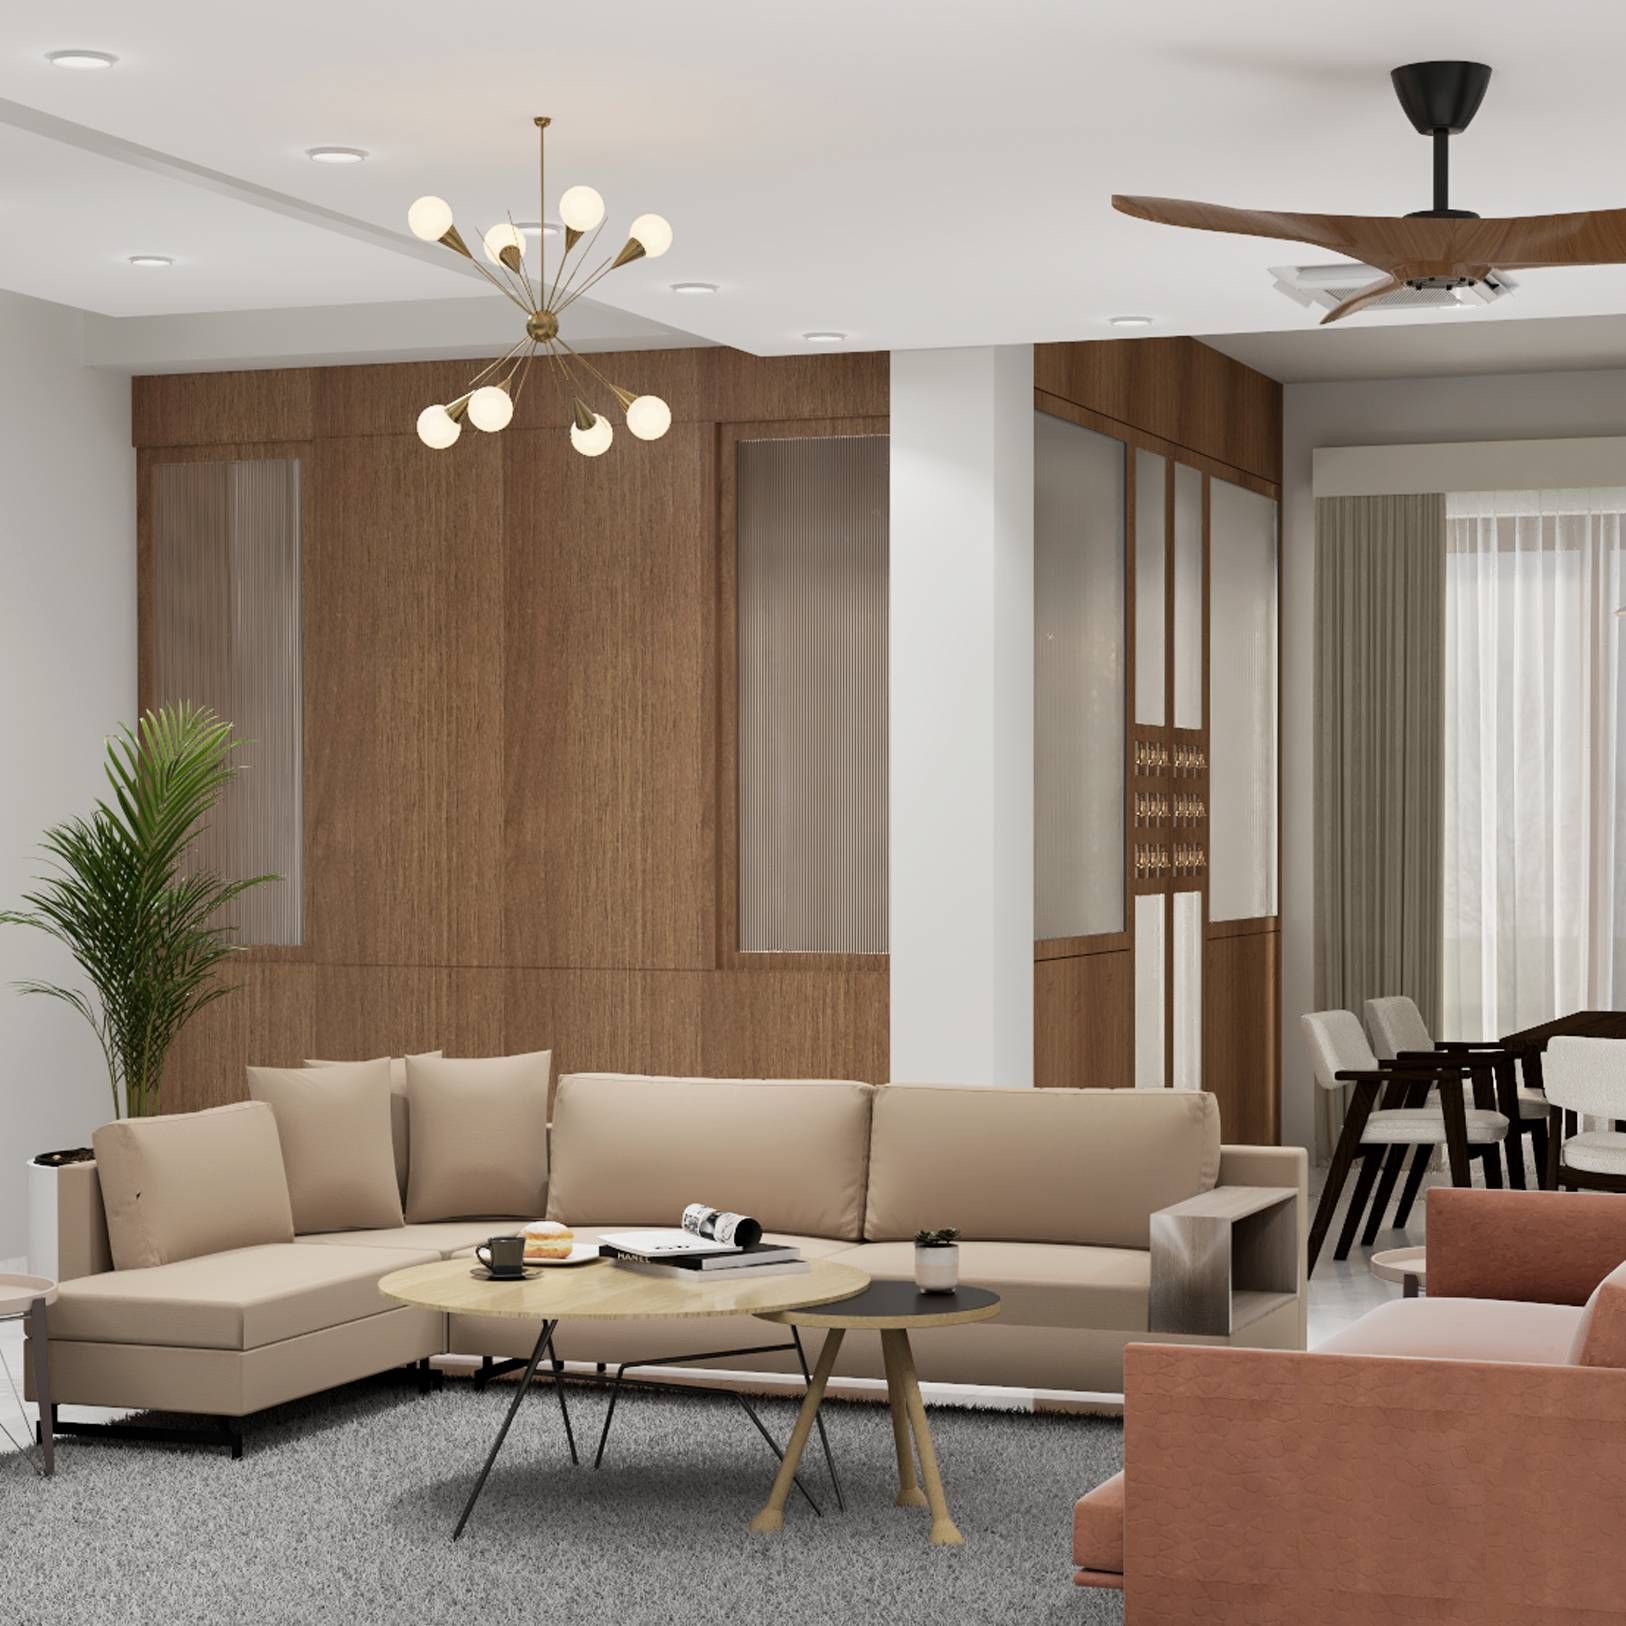 Modern Living Room With A Light Brown Upholstered L-Shaped Sofa